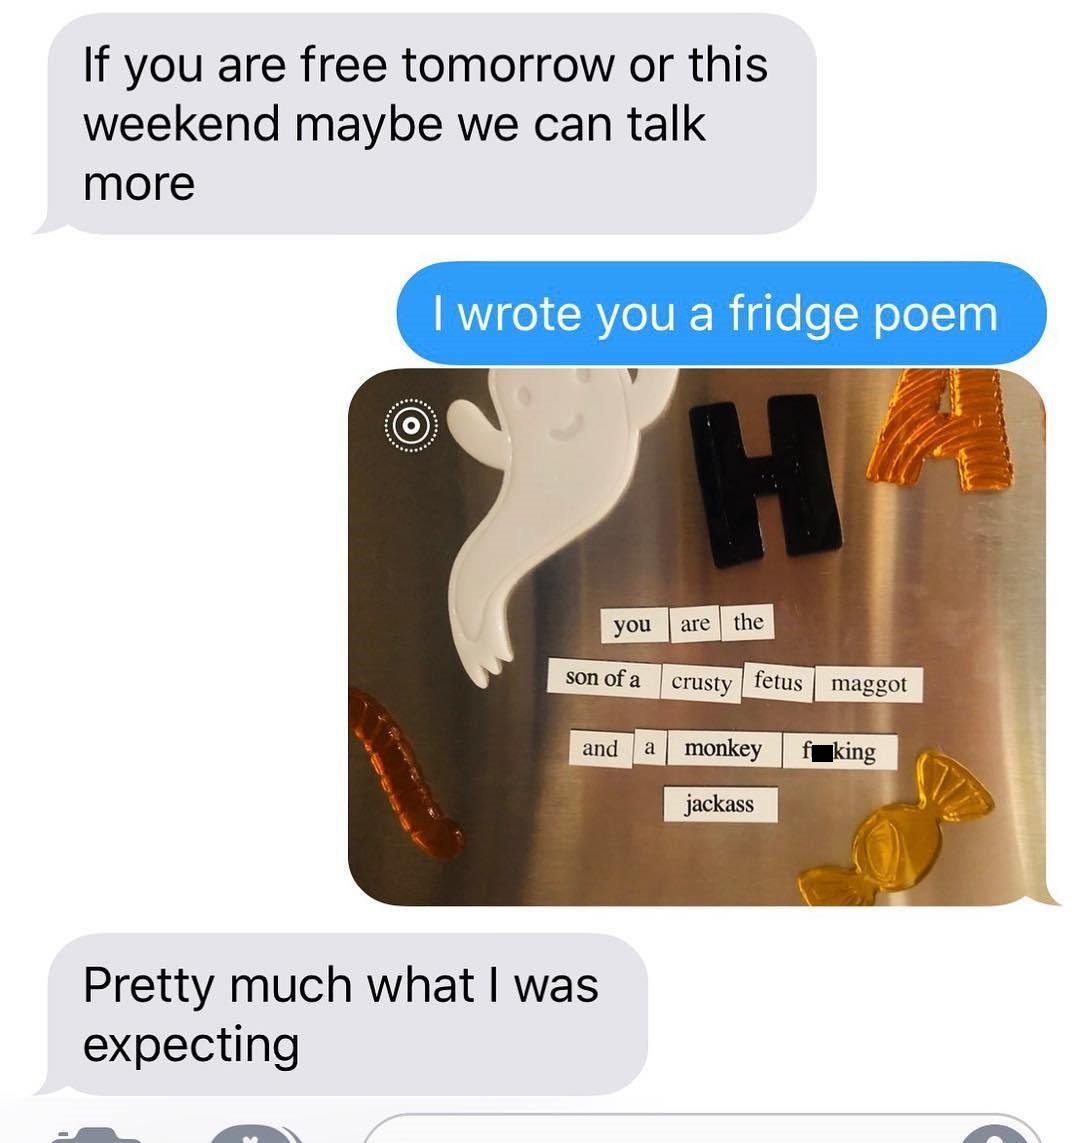 communication - If you are free tomorrow or this weekend maybe we can talk more I wrote you a fridge poem you are the son of a crusty fetus maggot and a monkey fking jackass Pretty much what I was expecting